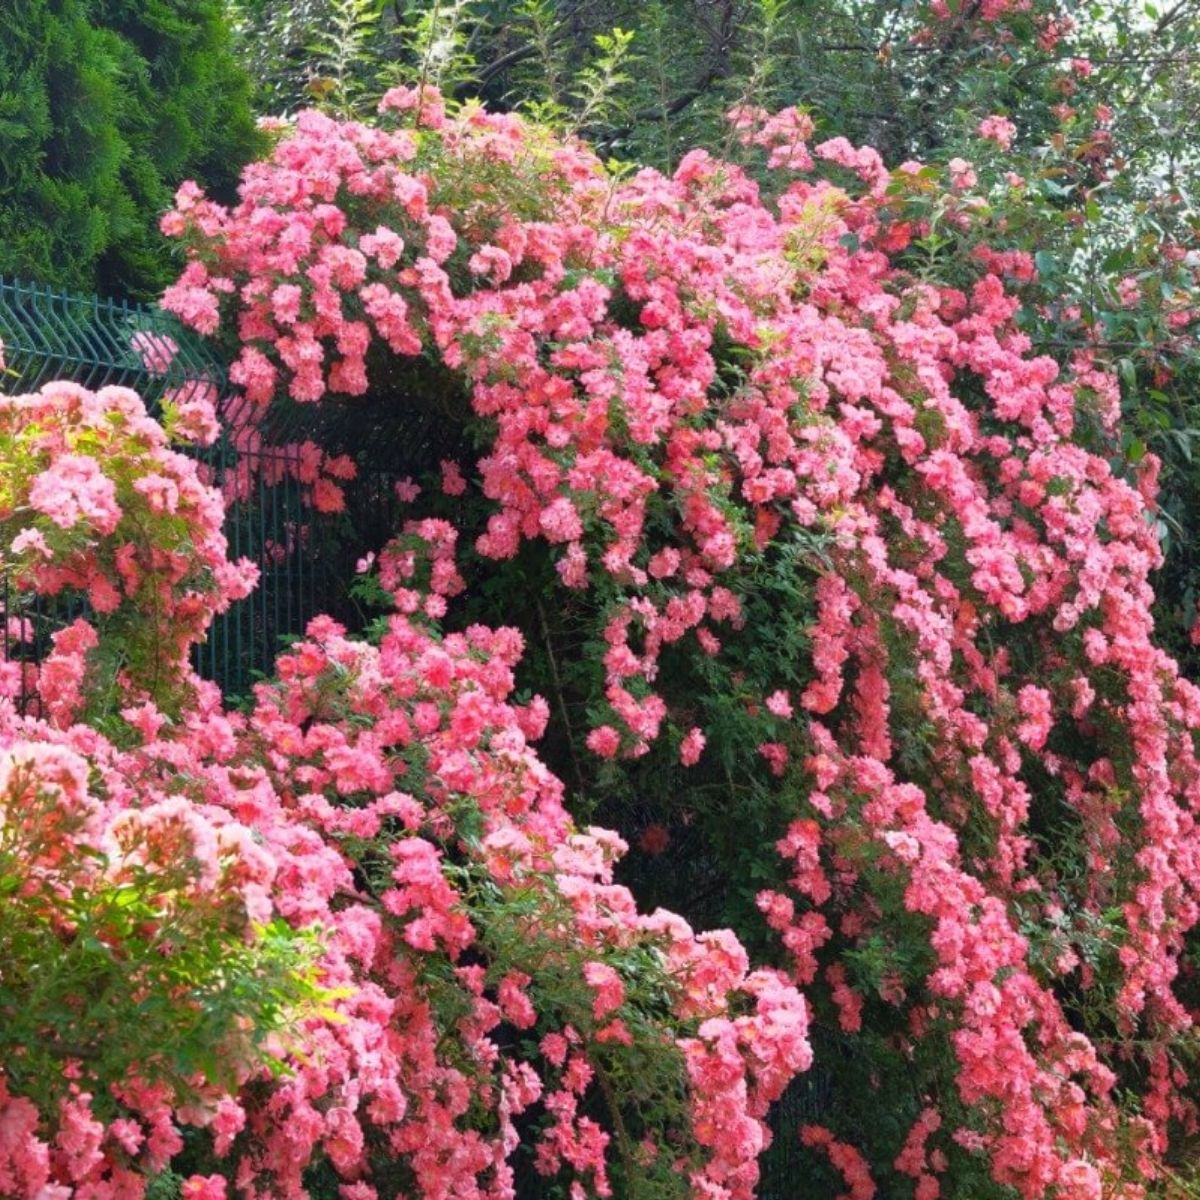 28 climbing rose varieties and growing guide + mistakes to avoid